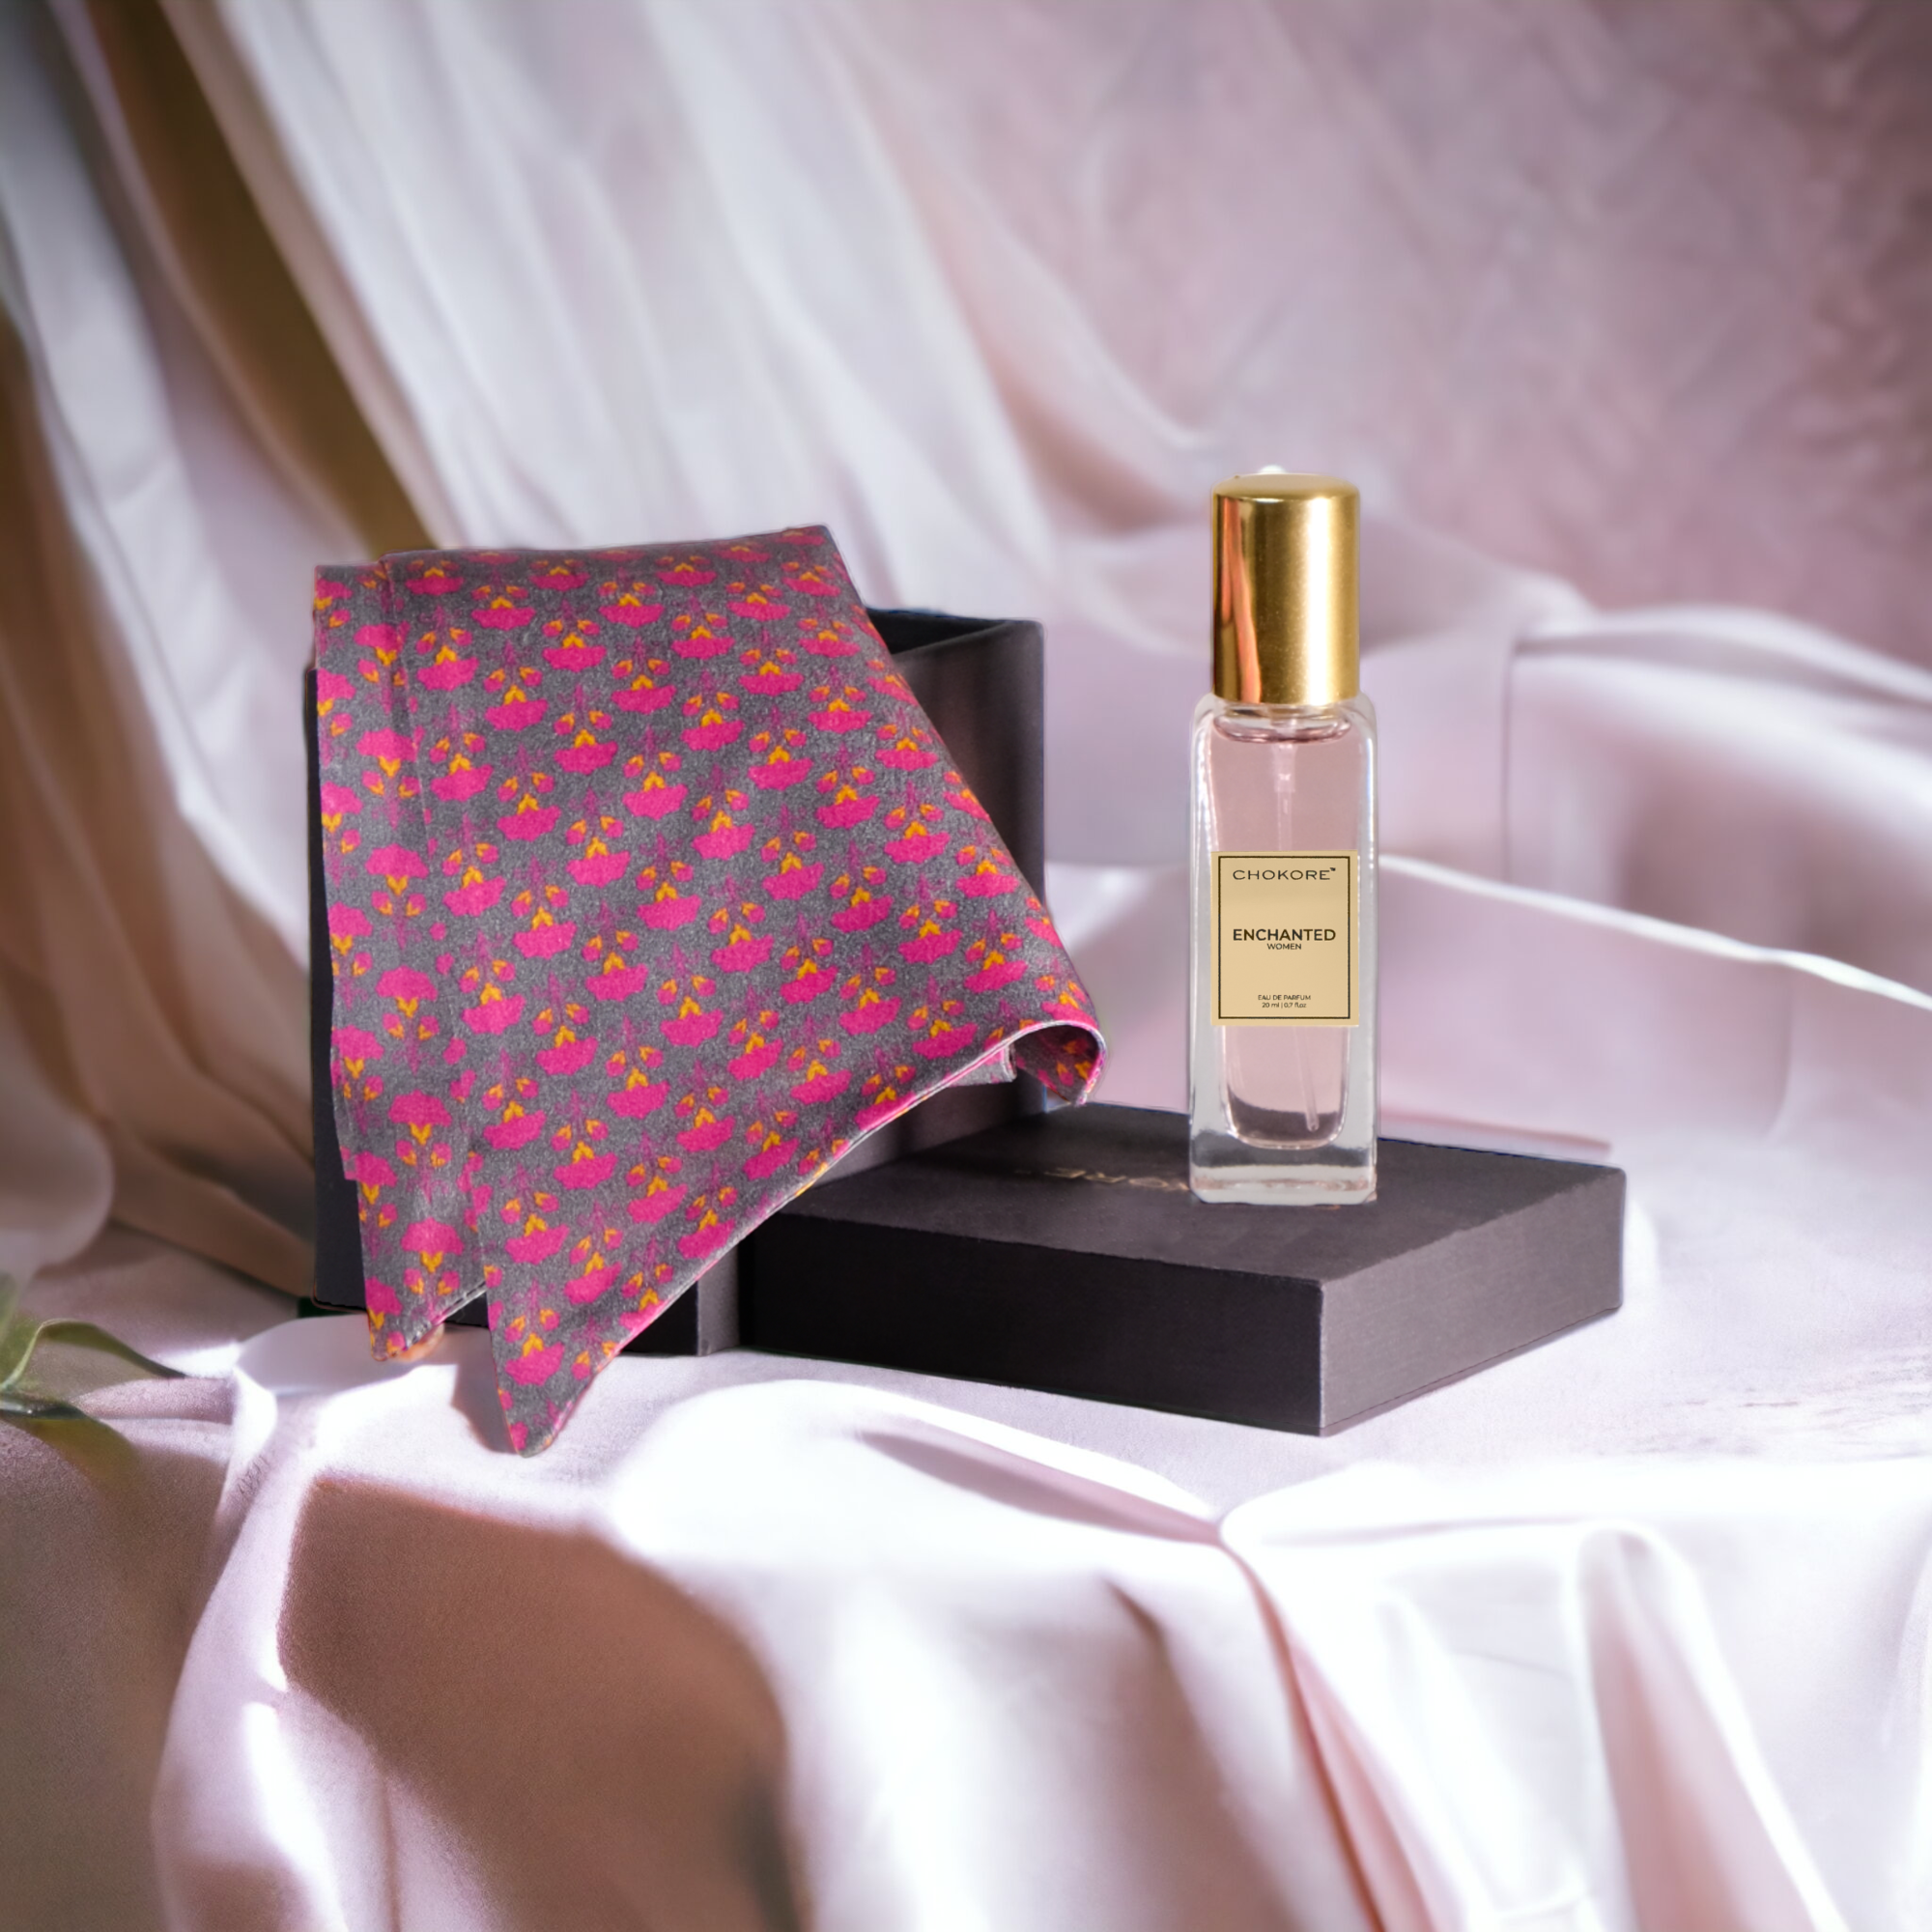 Chokore Special 2-in-1 Gift Set for Her(Pink and Purple Silk Scarf & 20 ml Enchanted Perfume)Her (Printed Stole & 20 ml Scandalous Perfume)